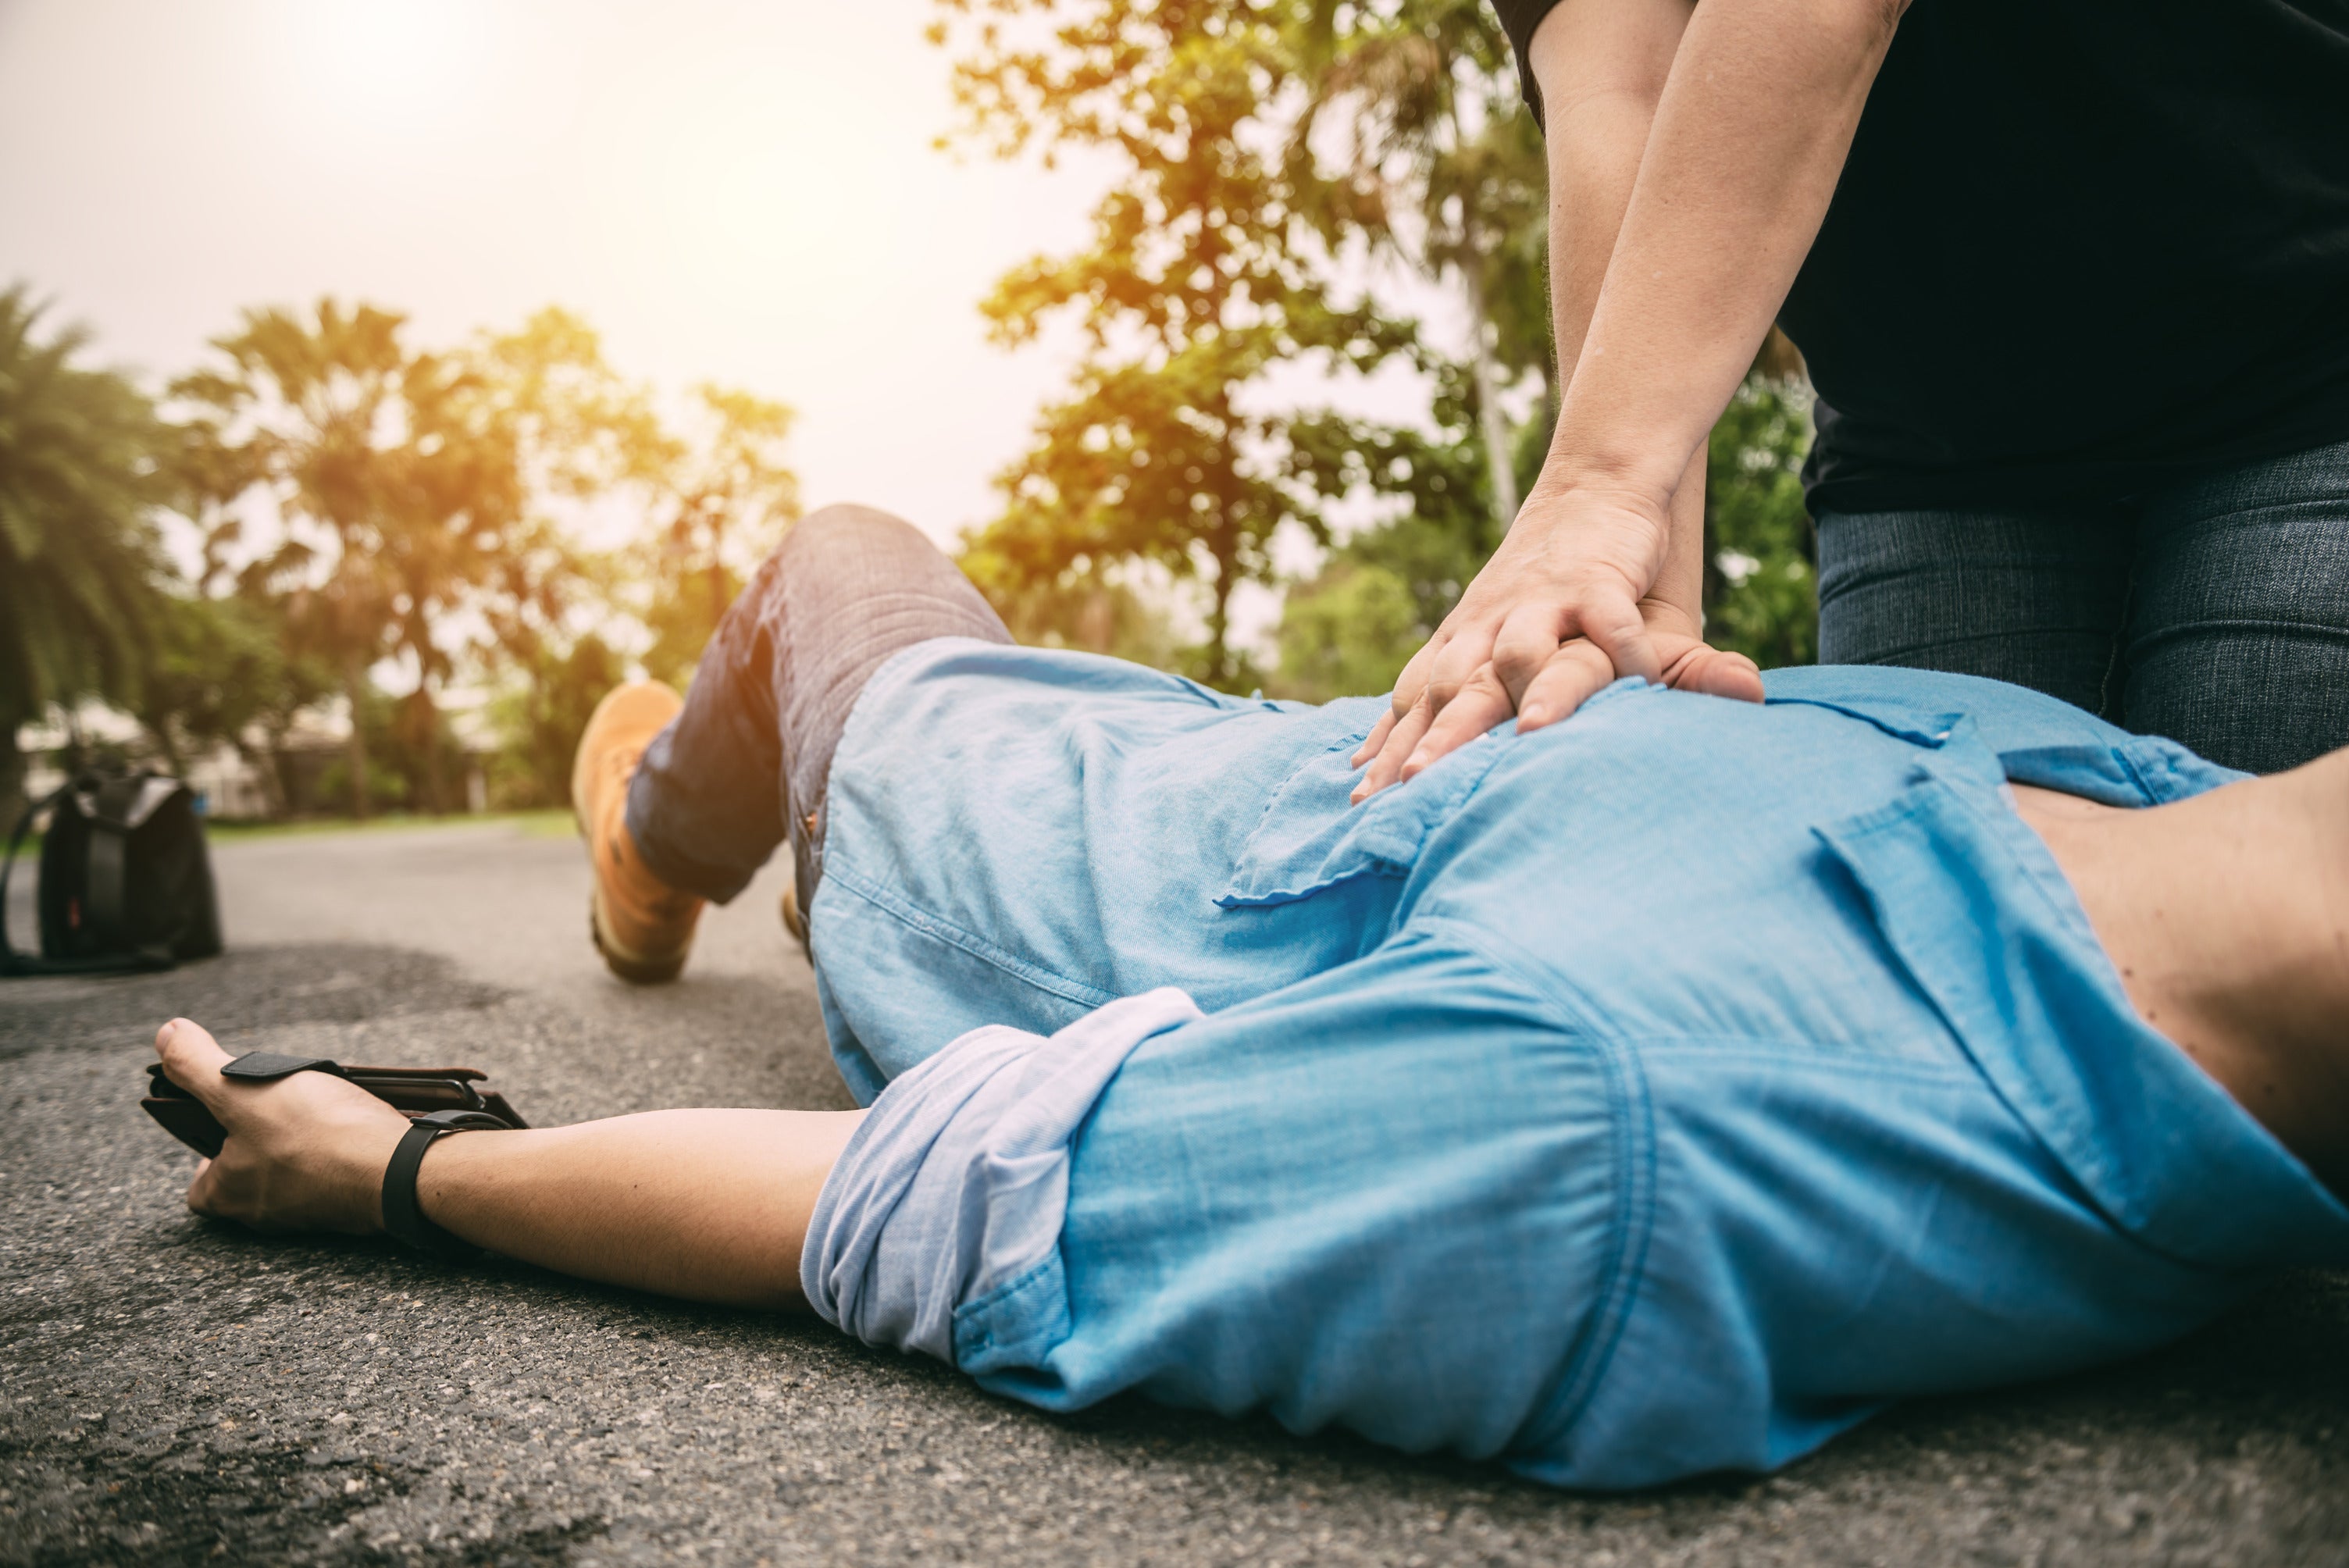 CPR compressions being delivered to an unconscious man in a blue shirt